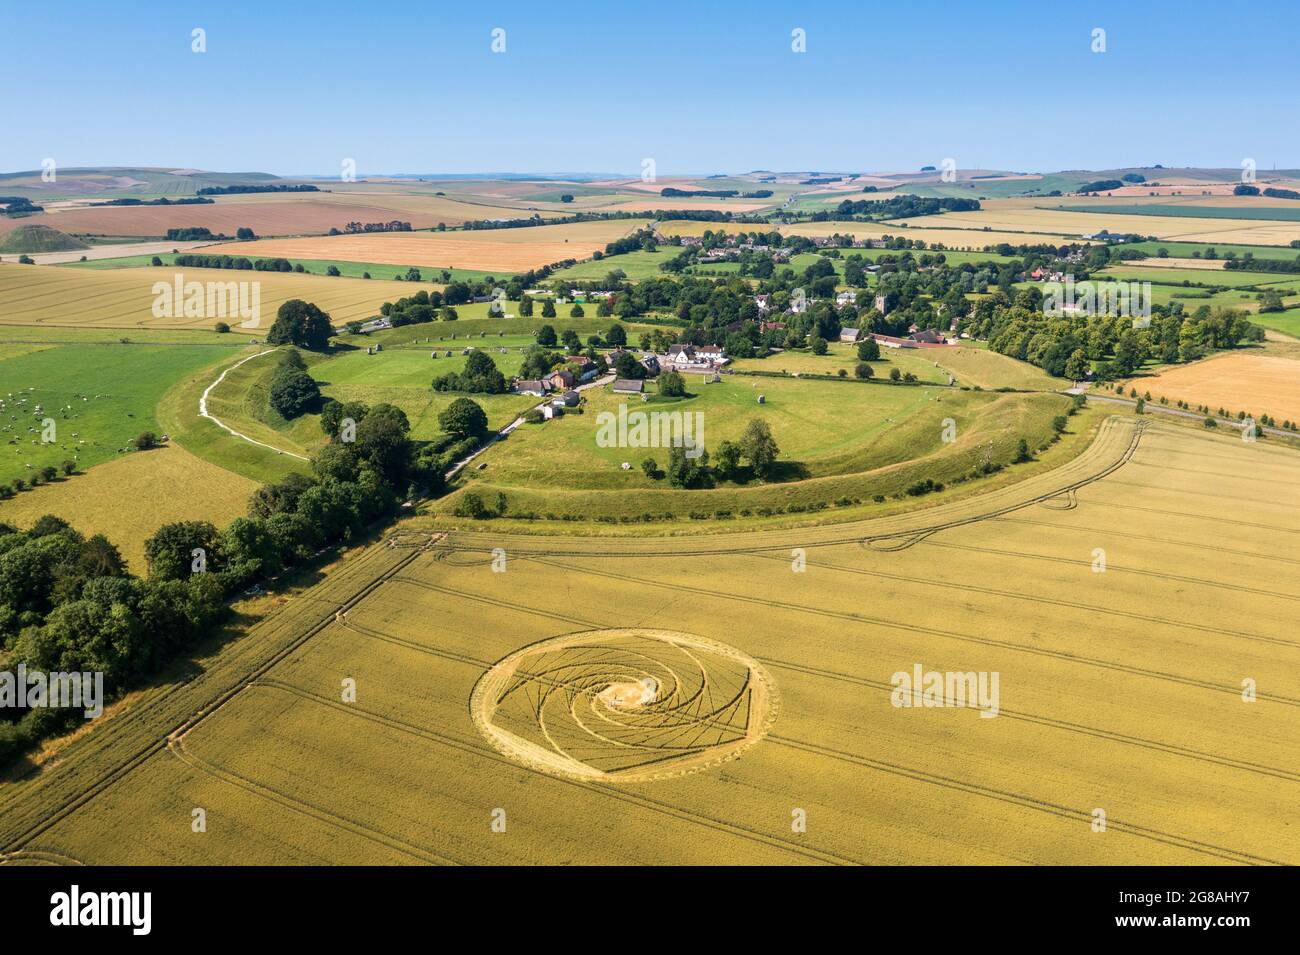 Avebury Village with neolithic Stone Circle and crop circles, Wiltshire, England Stock Photo